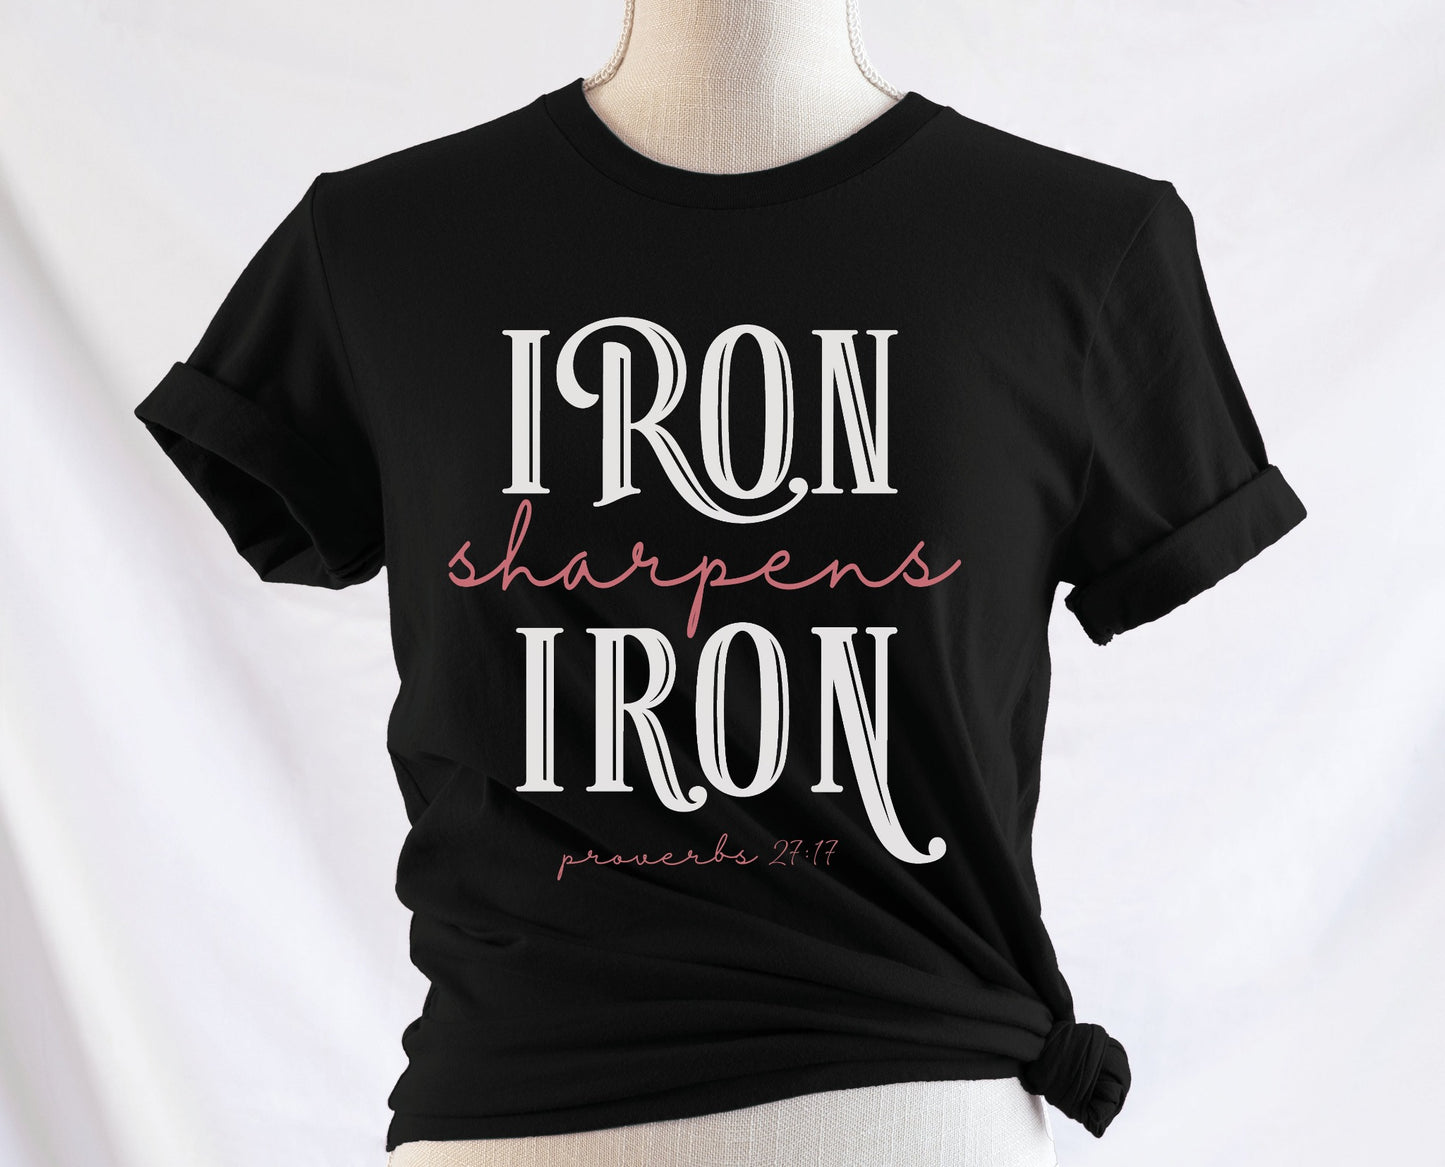 Iron Sharpens Iron Proverbs 27:17 Christian aesthetic design printed in white and mauve on ladies soft black unisex t-shirt for women's groups